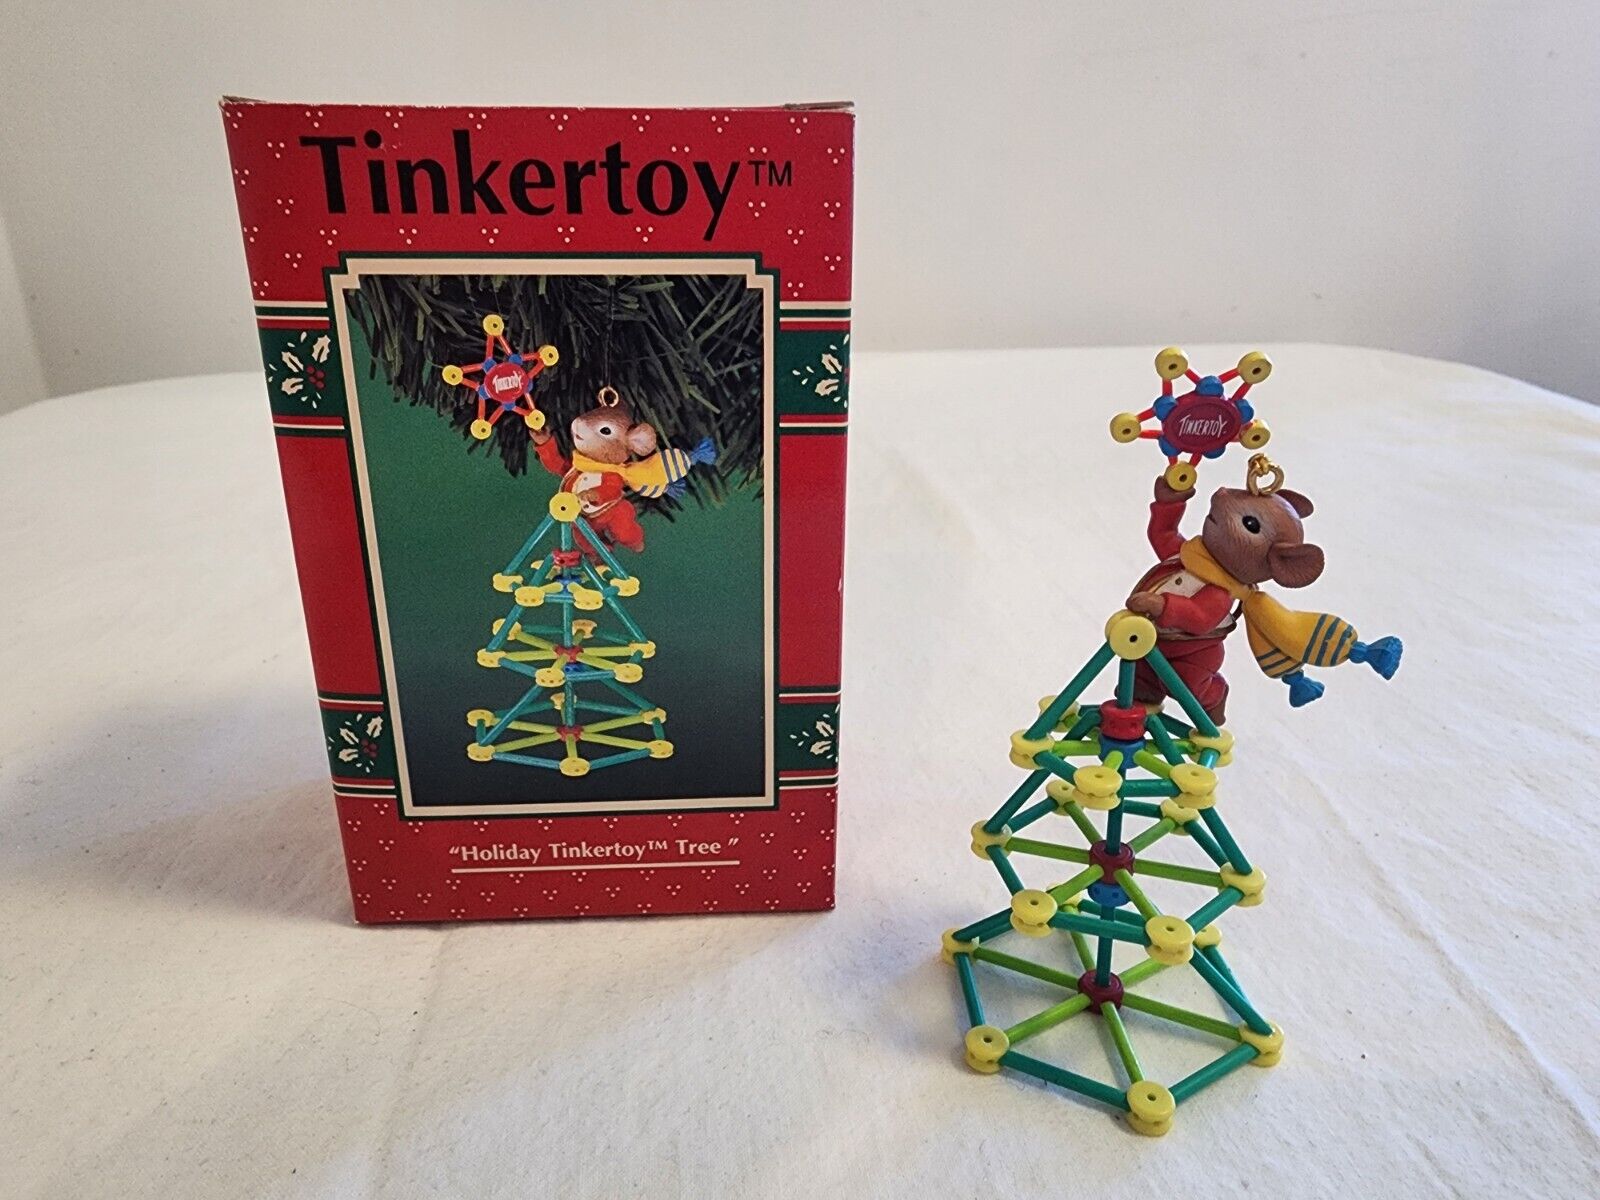 Holiday Tinkertoy Tree Enesco Ornament 1996 Mouse Vintage